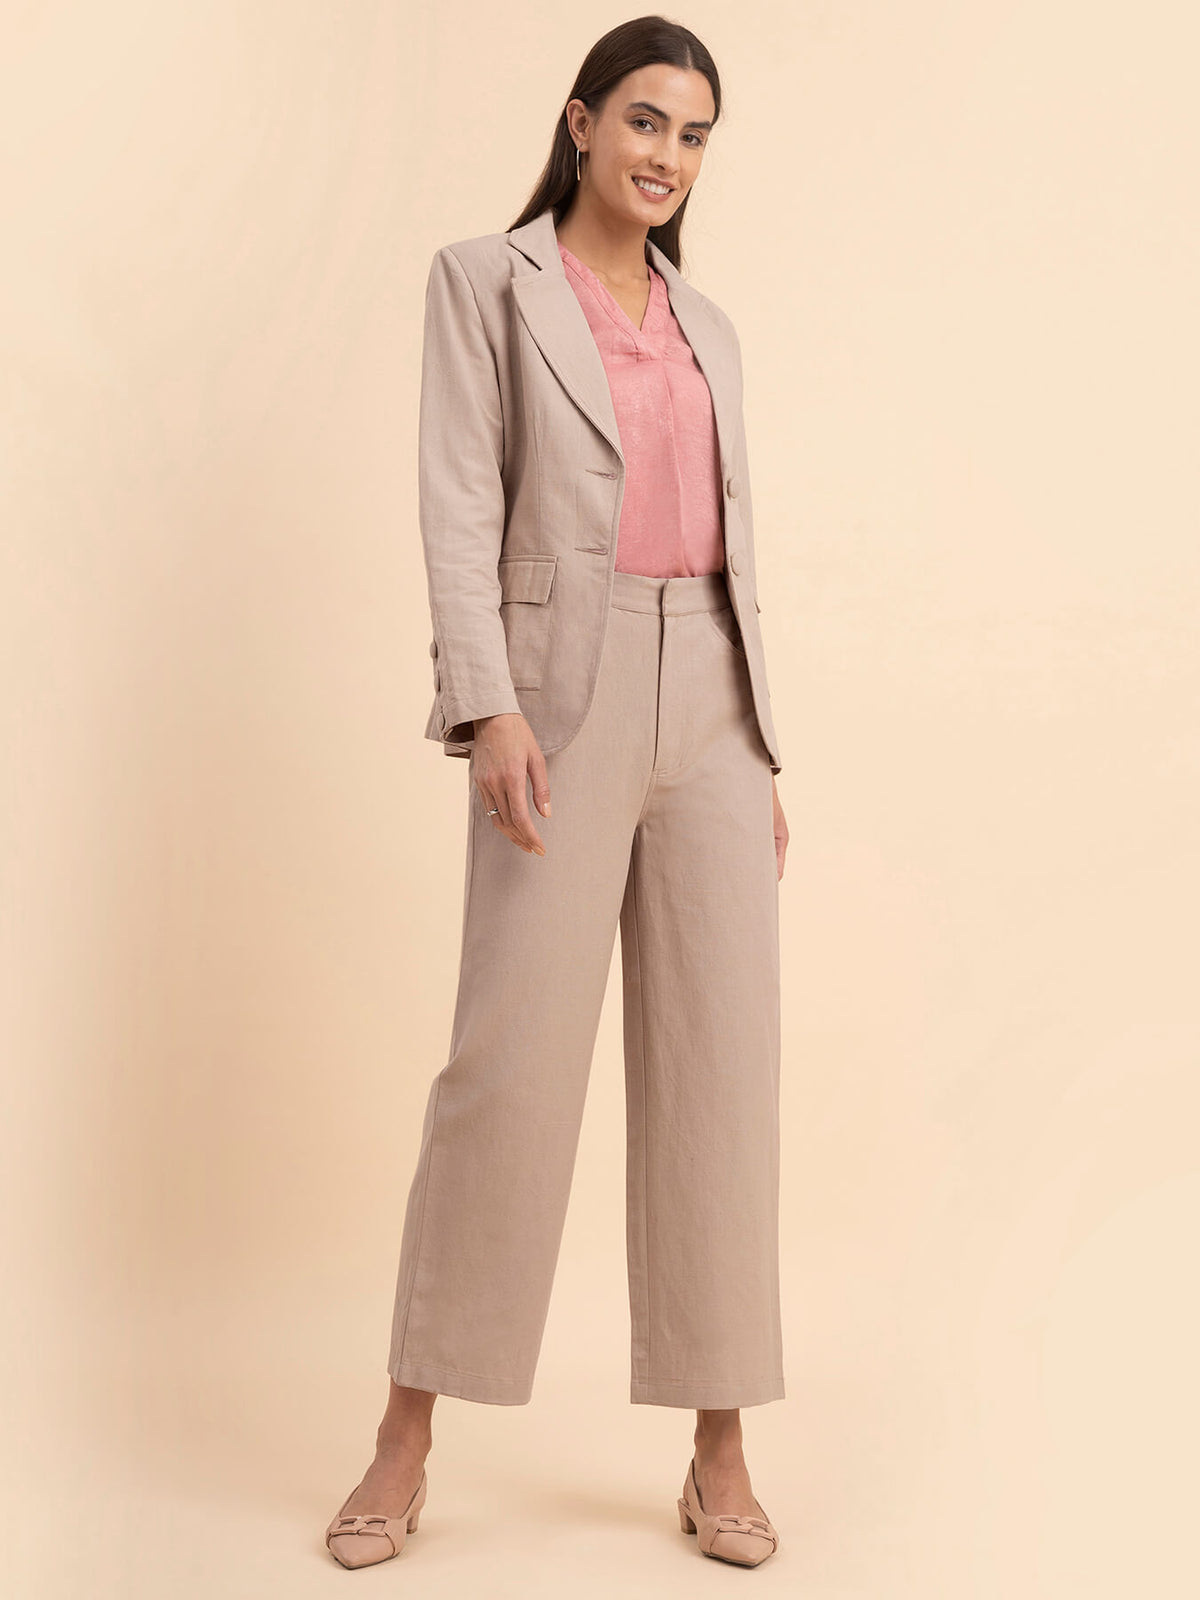 Linen Blazer and Trousers Co-ord - Beige